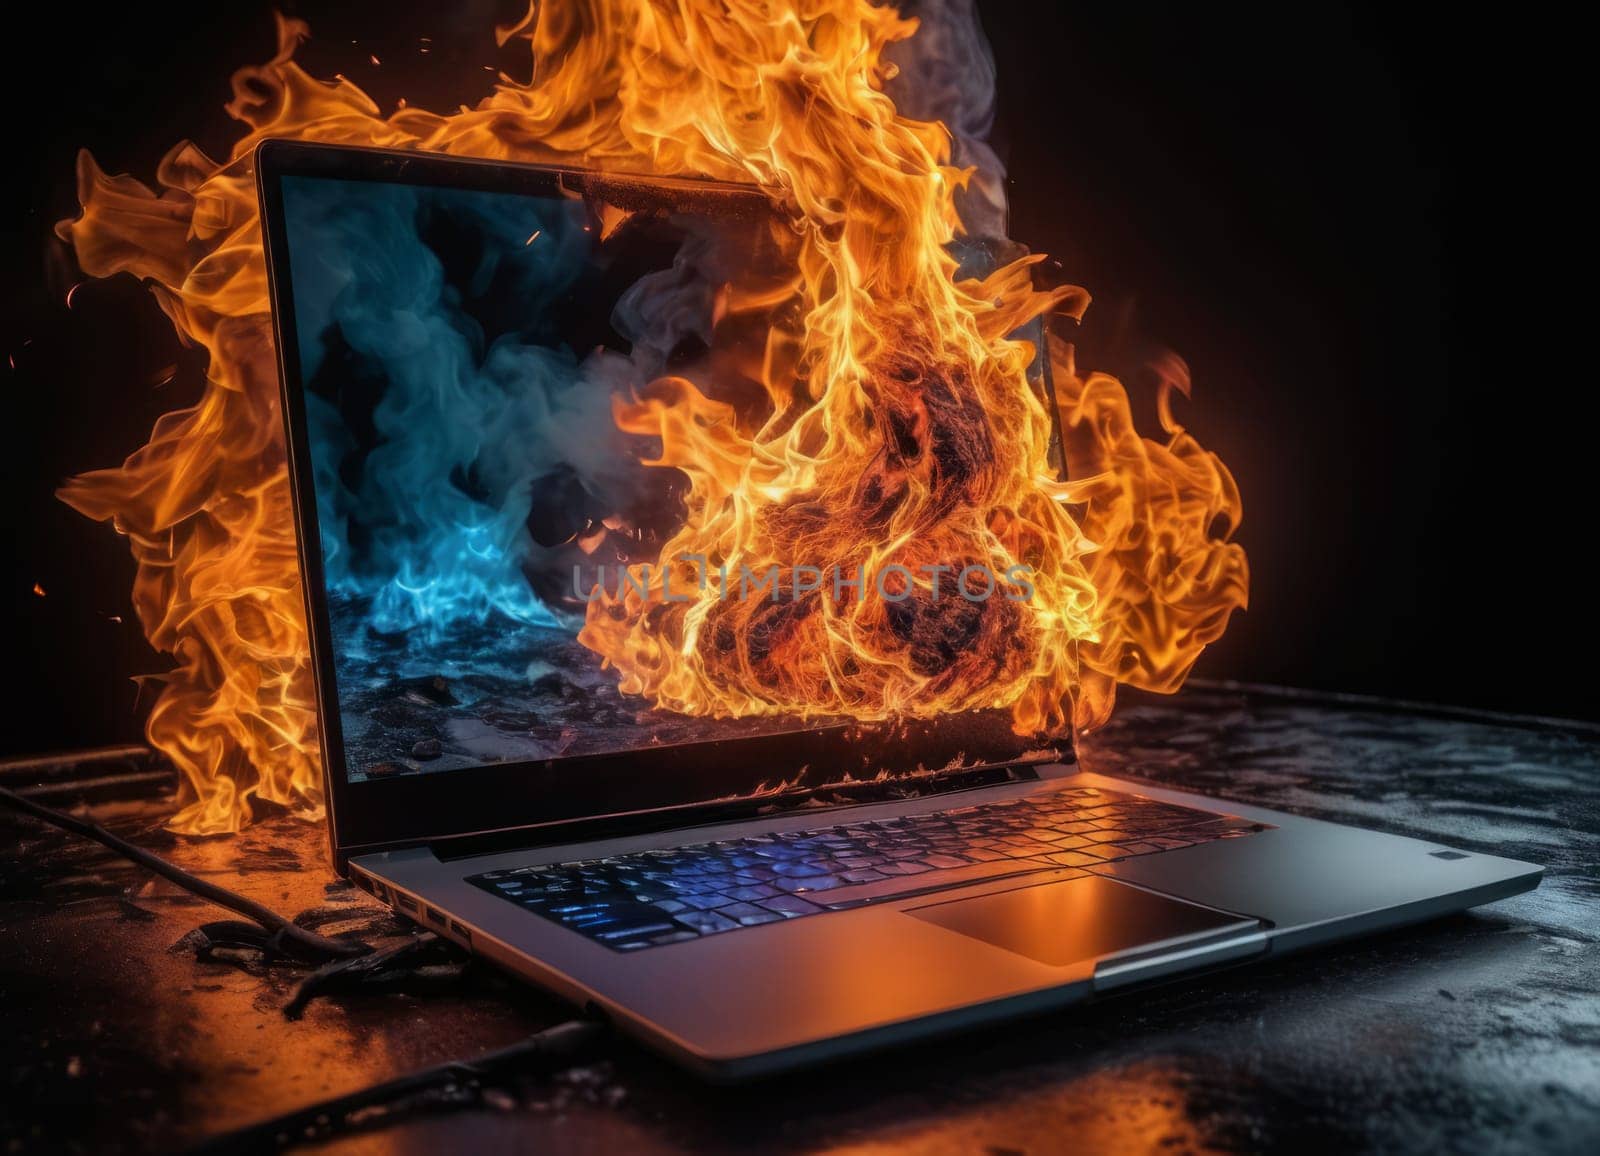 A dramatic image of a blue laptop engulfed in vivid orange and yellow flames, indicating a severe fire hazard or a metaphor for a disastrous situation.